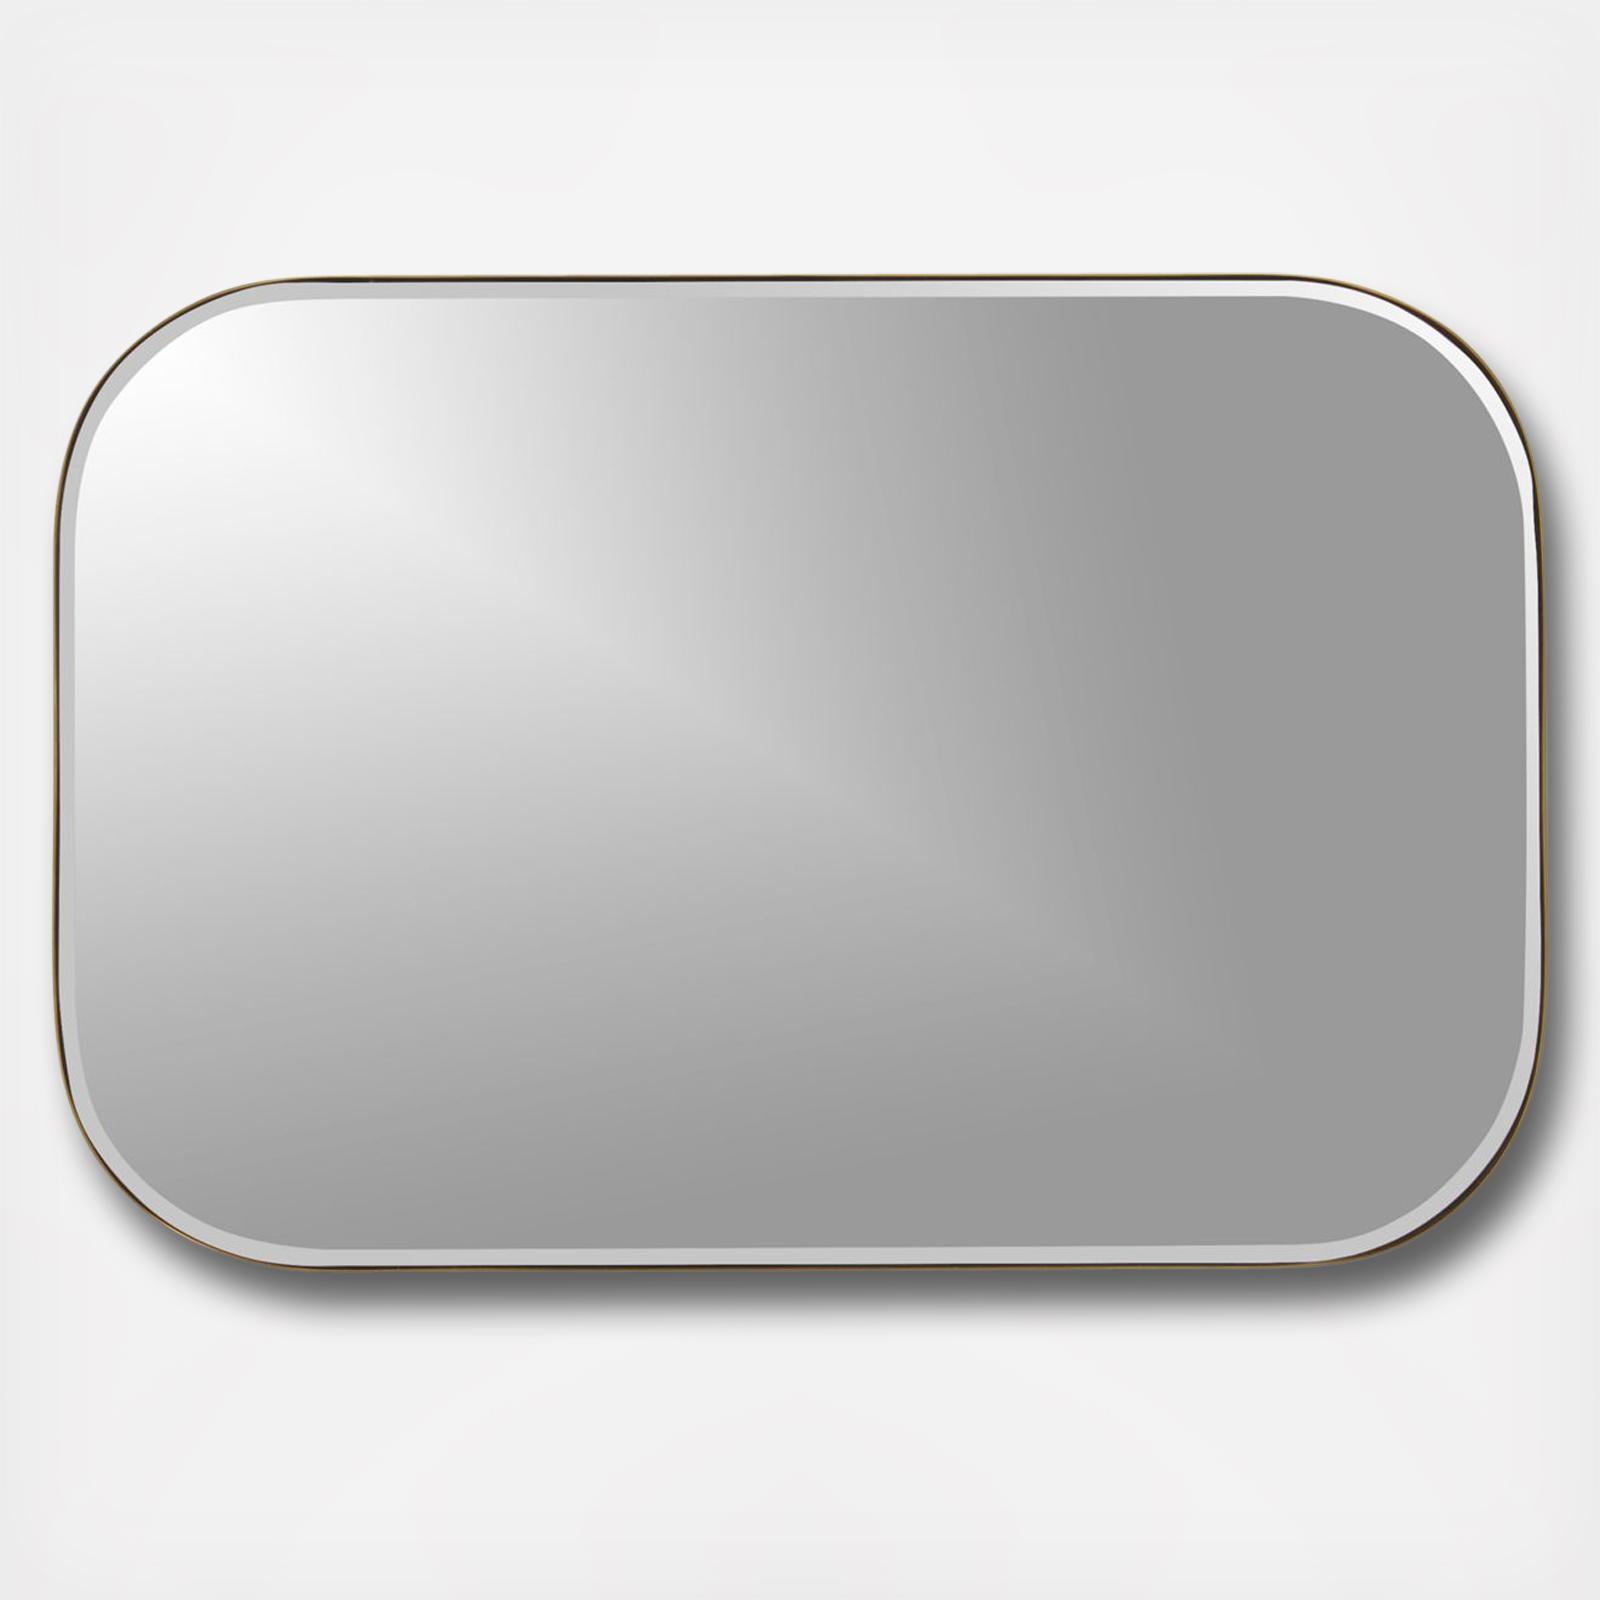 Crate And Barrel Edge Rounded, Rounded Edges Rectangular Mirror